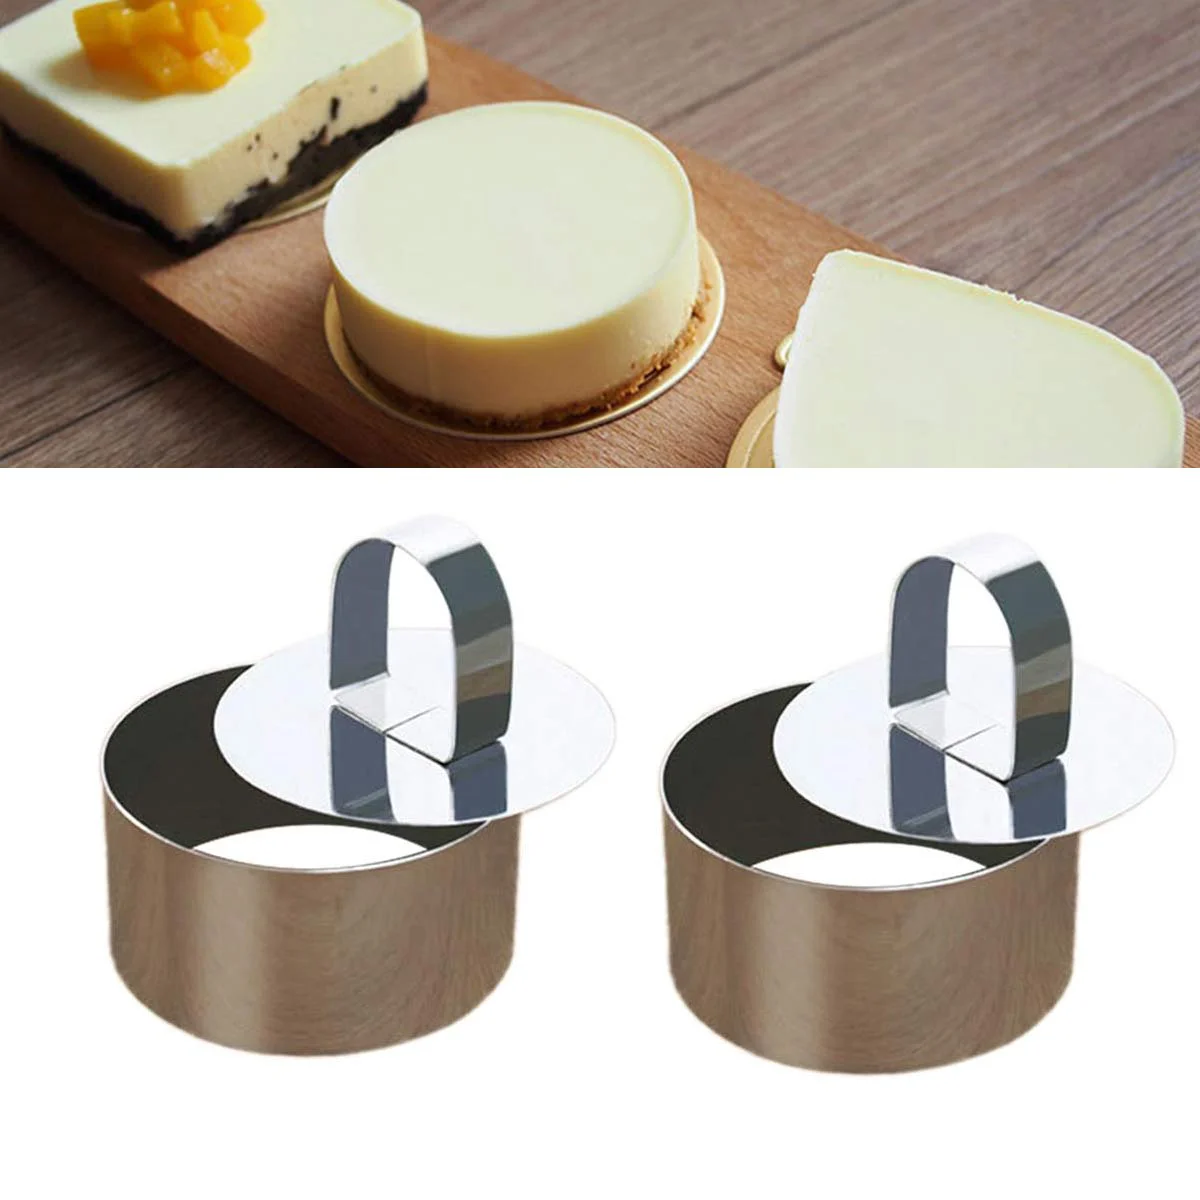 

2 Pcs Box Chocolate Circle Cake Cheese Its Crackers Rings Cheese Cakes Cake Decorating Collar Push Plate